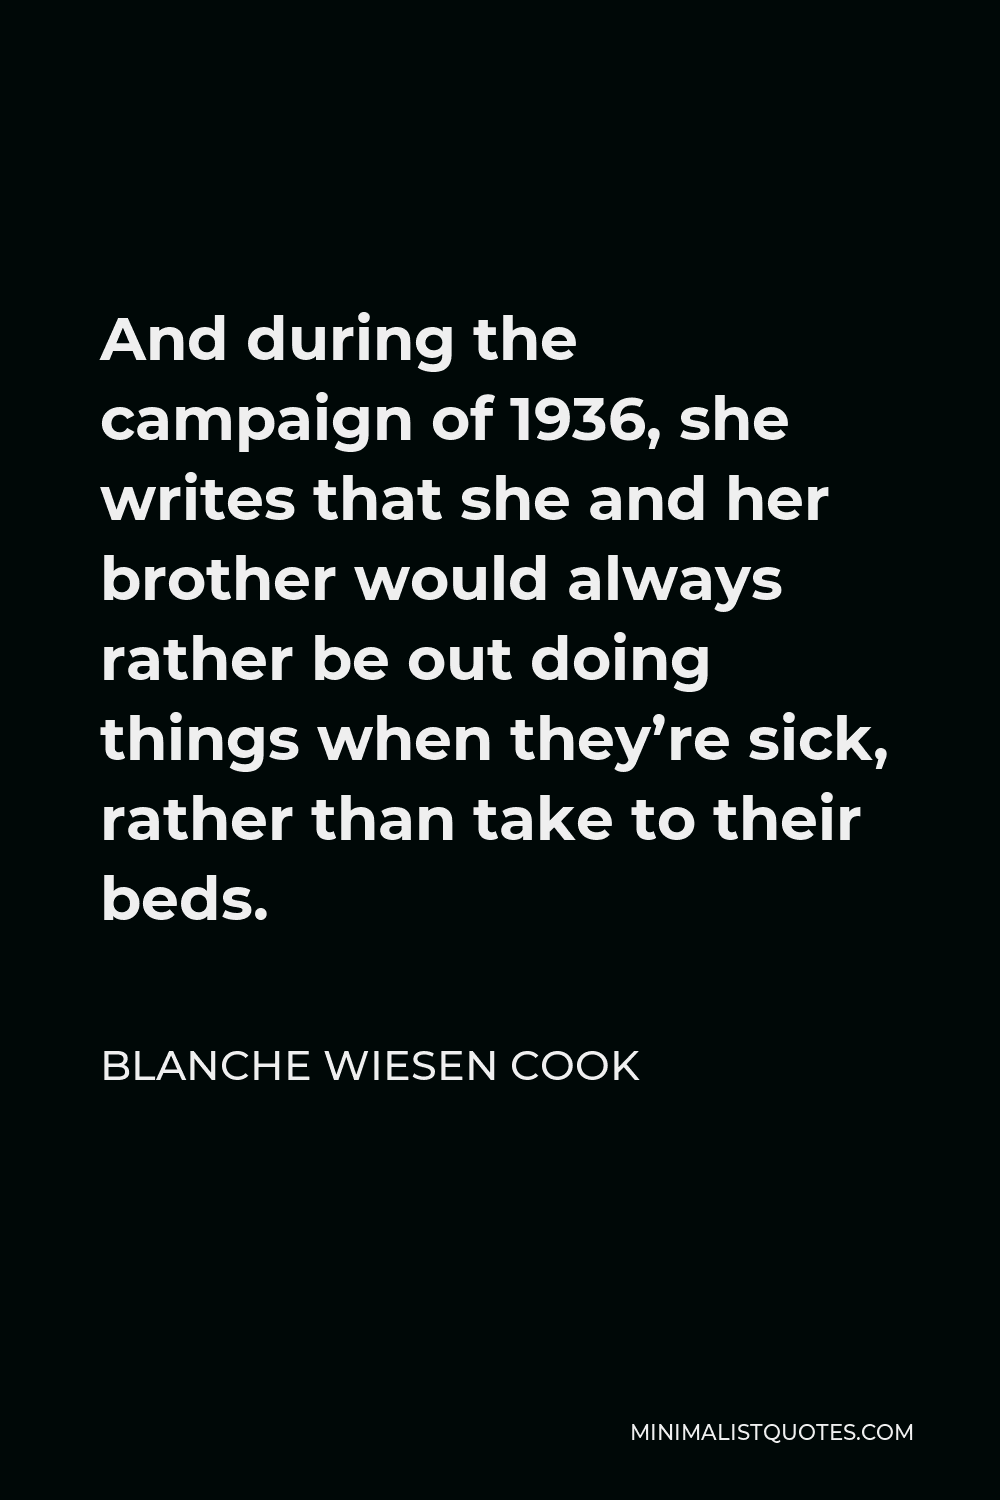 Blanche Wiesen Cook Quote - And during the campaign of 1936, she writes that she and her brother would always rather be out doing things when they’re sick, rather than take to their beds.